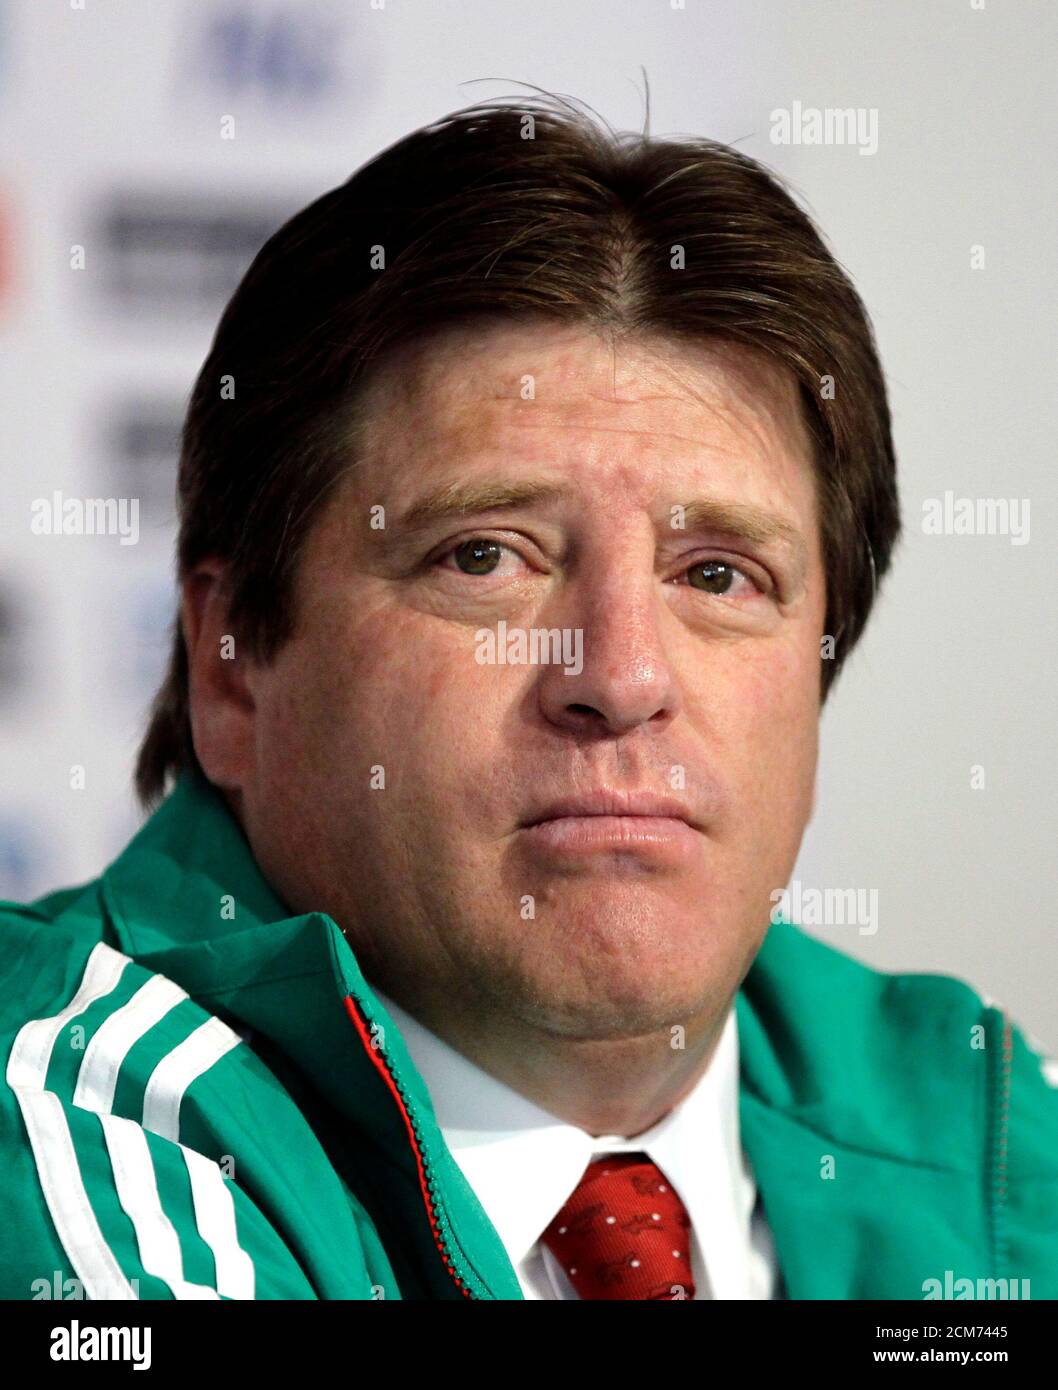 Mexico's new national soccer team coach Miguel Herrera listens to a  journalist's question during his presentation to the media in Mexico City  October 20, 2013. Herrera became Mexico's fourth coach in less